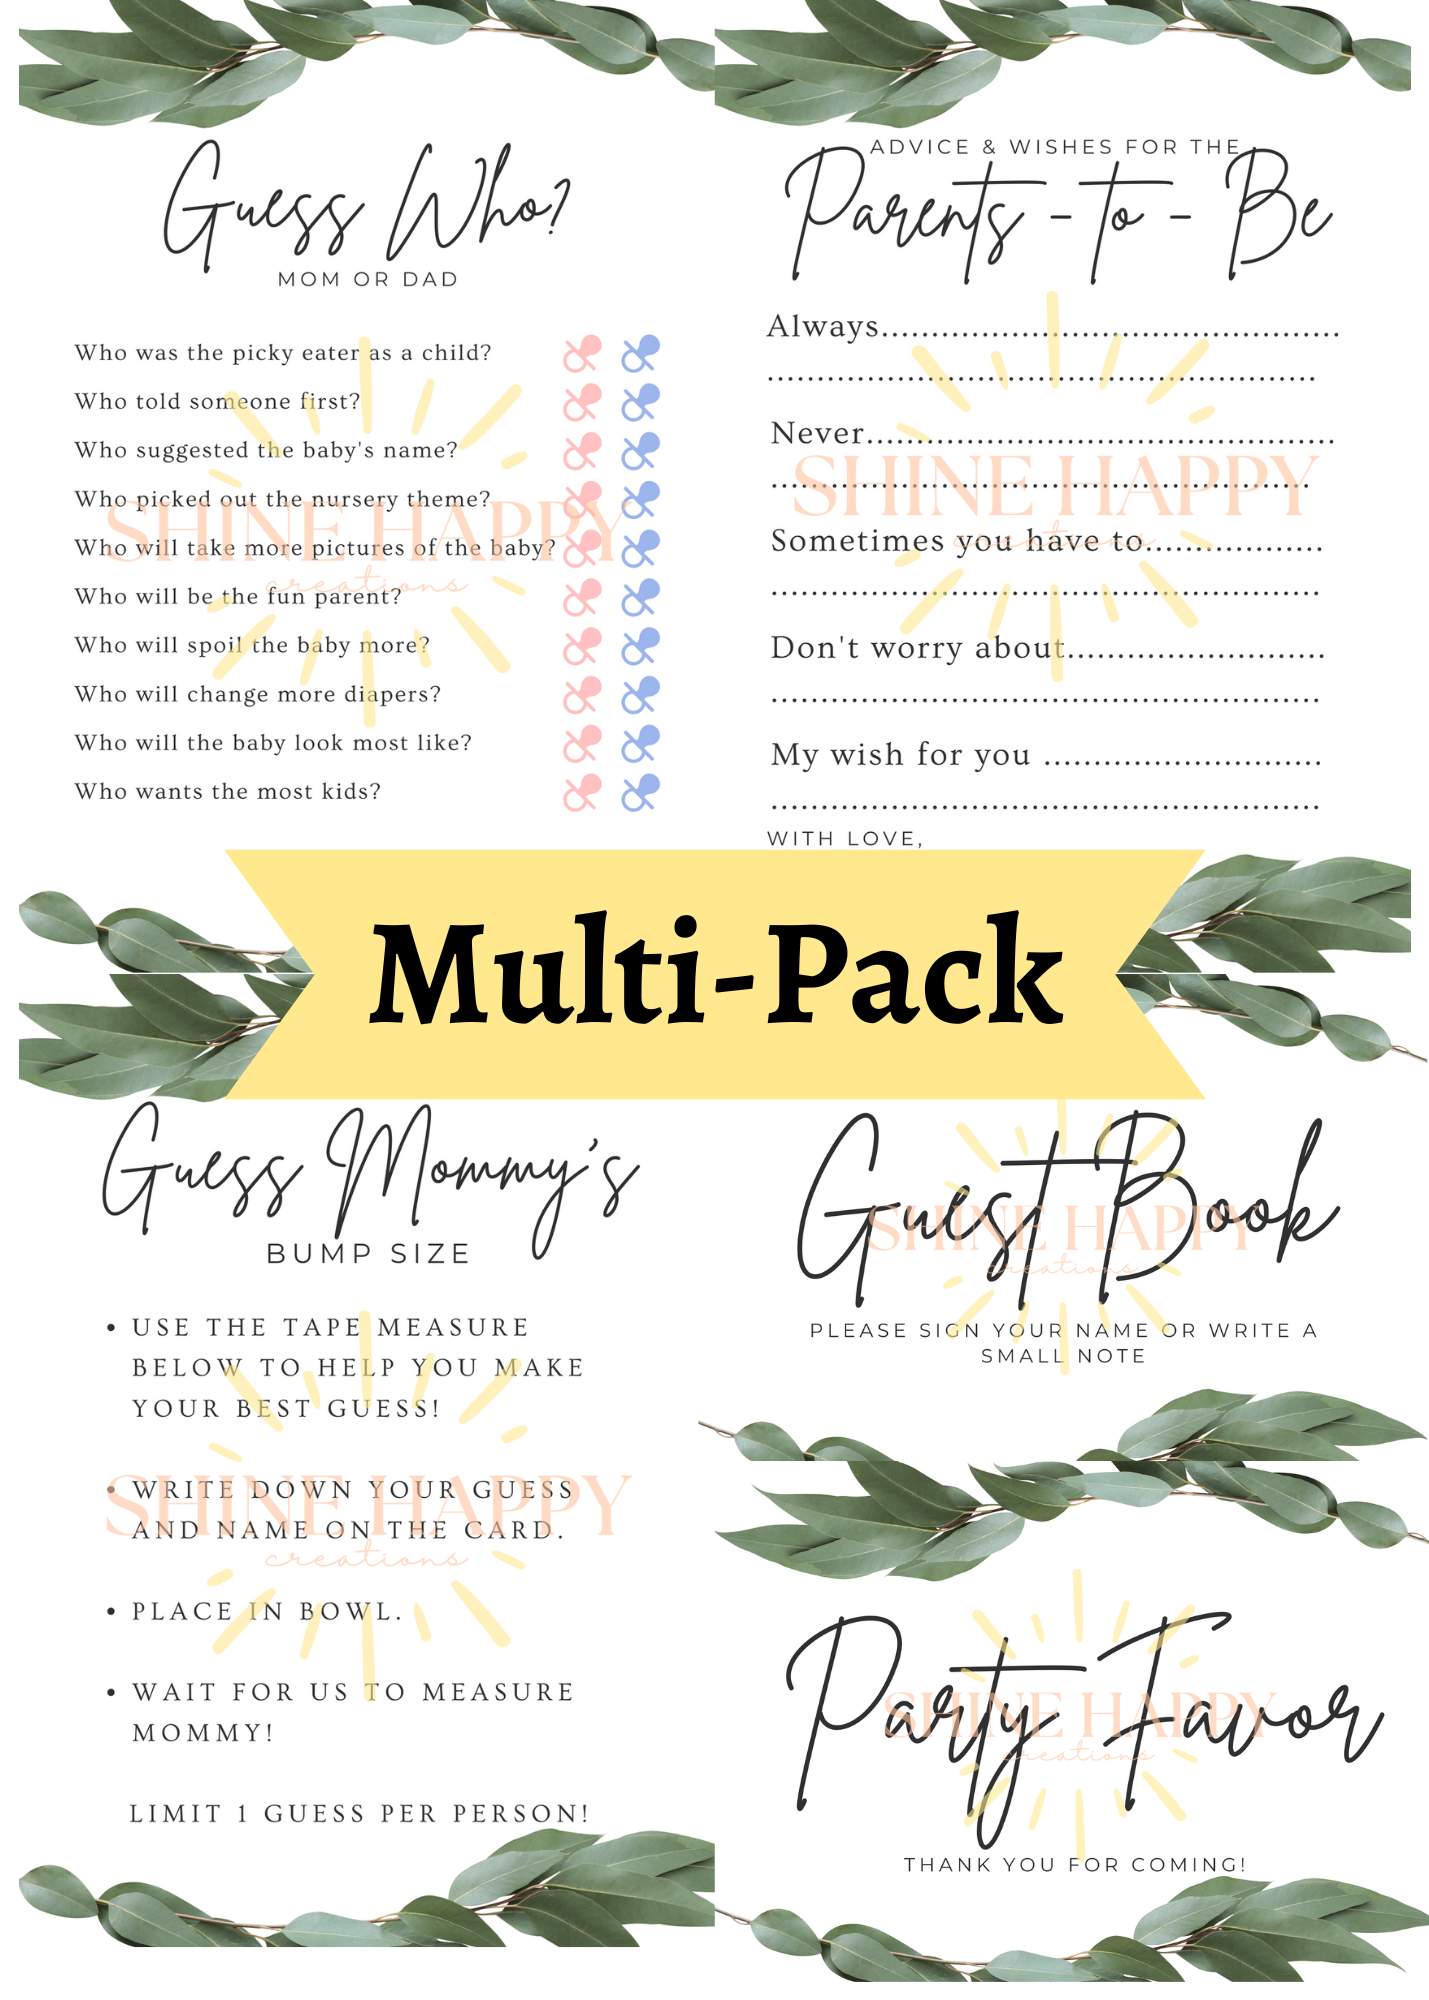 Baby Shower Downloads - Multi Pack - Simplistic with Greenery - DOWNLOADABLE (pdf) PRINTABLE